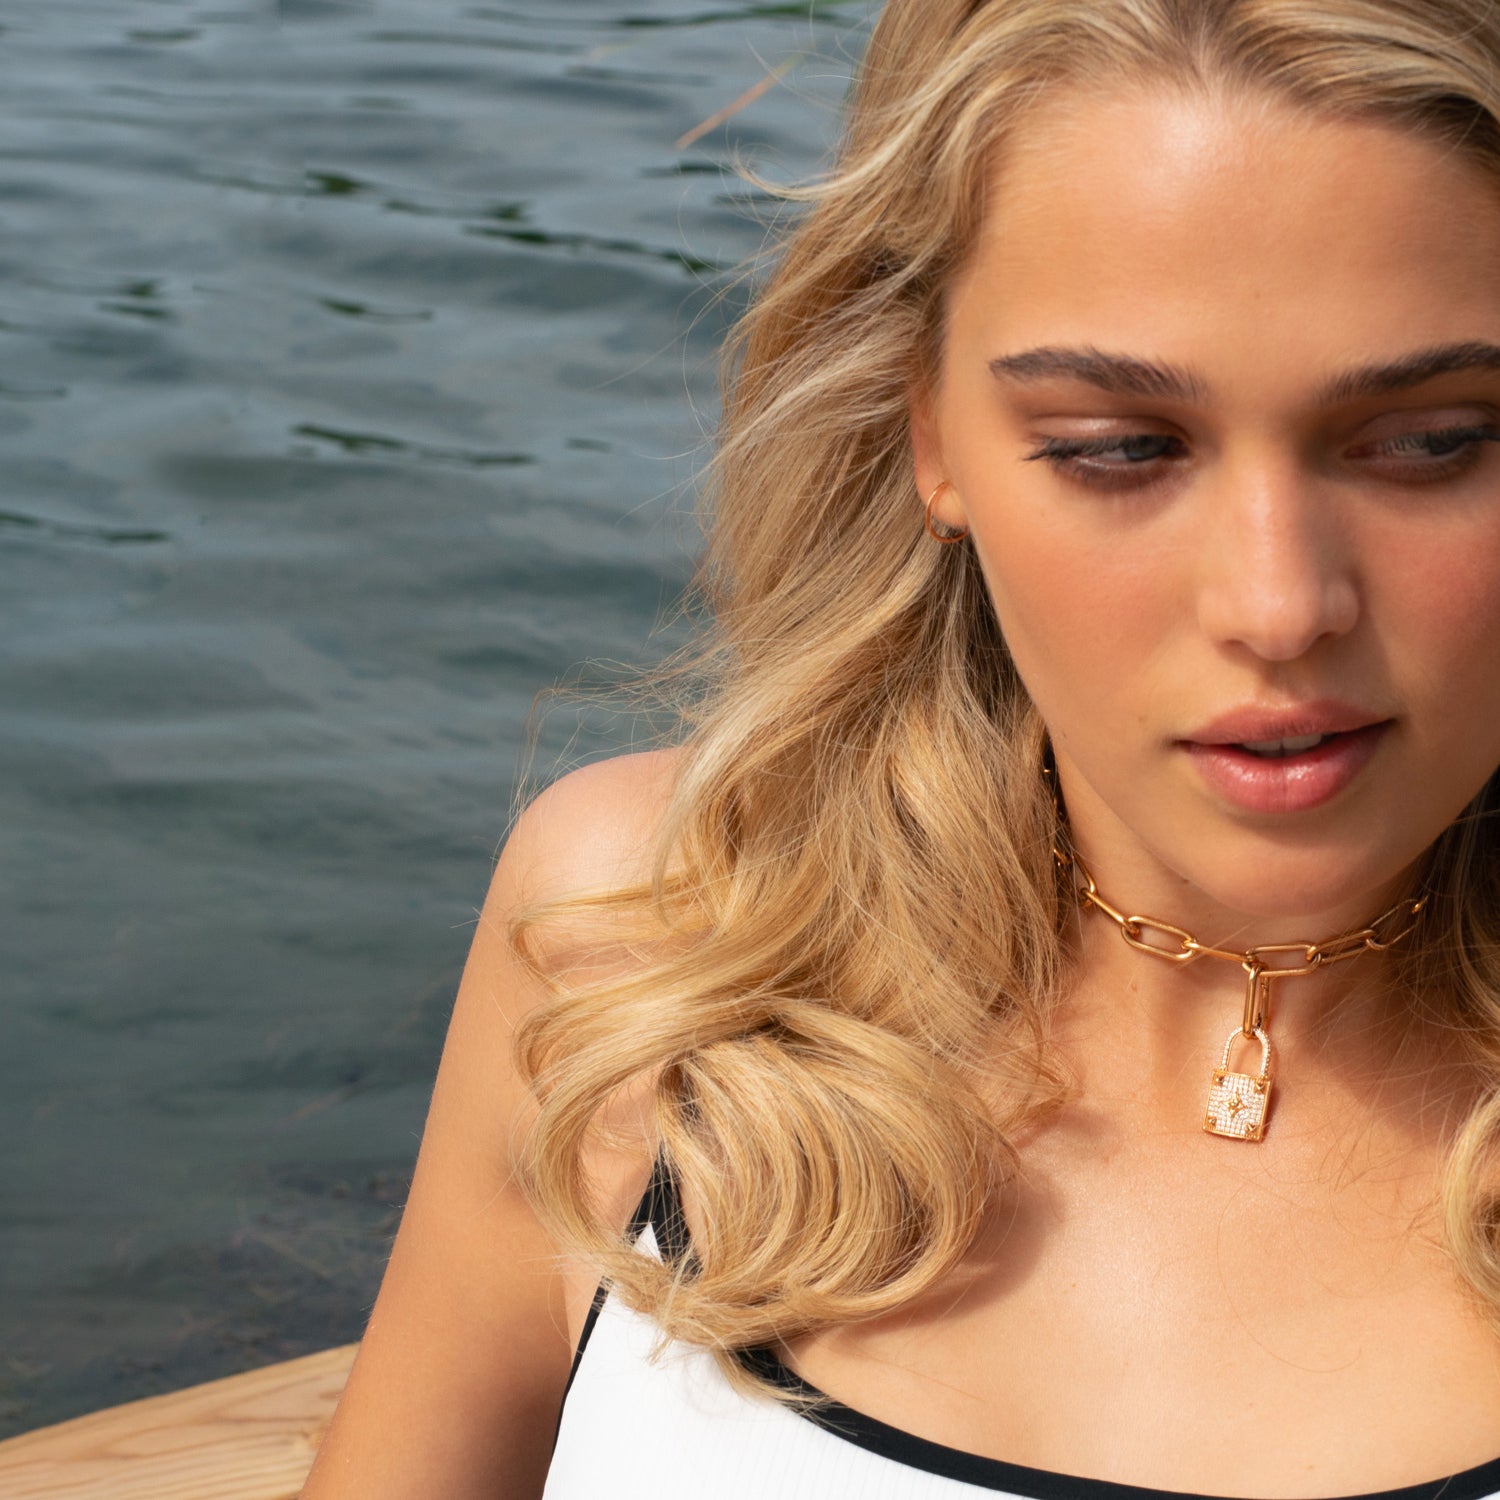 Blond woman in bikini with massive 18 KT rose gold necklace with lock pendant with white diamonds in front of blue lake